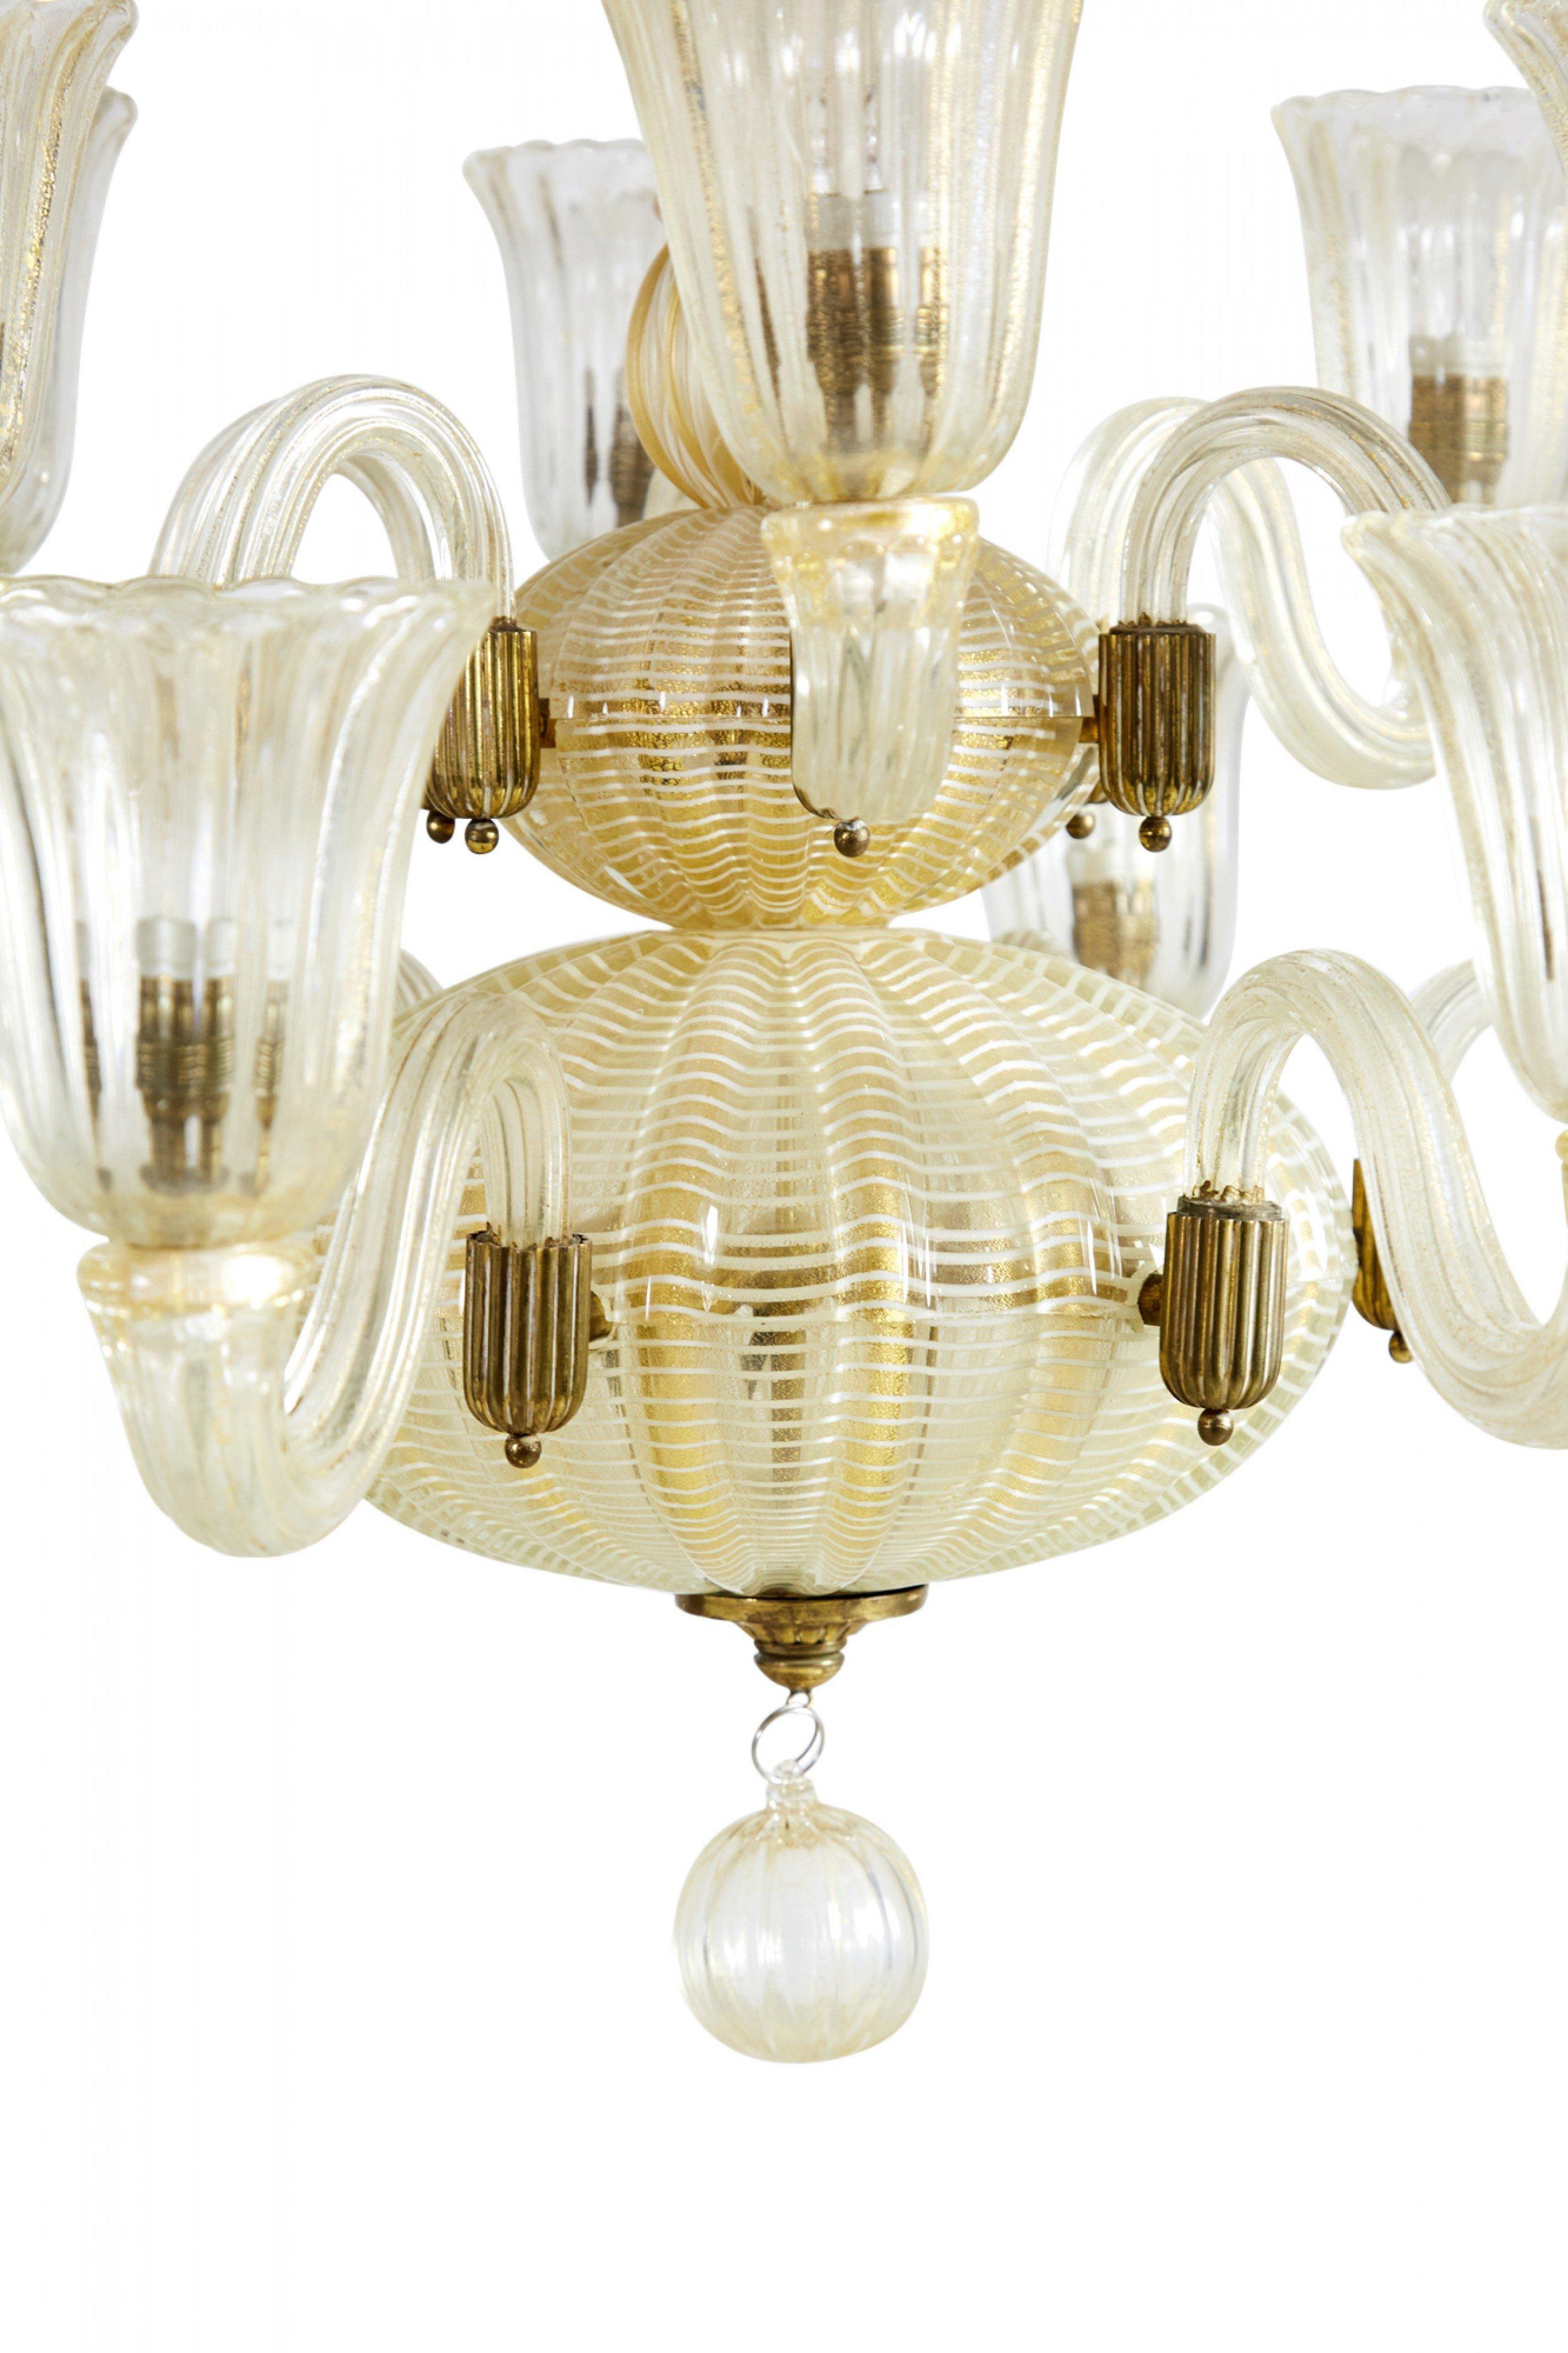 Italian Art Deco (1930s) gold-infused glass chandelier with 12 arms on two tieres, mounted to a central canopie with fluted shades. (BAROVIER).
    